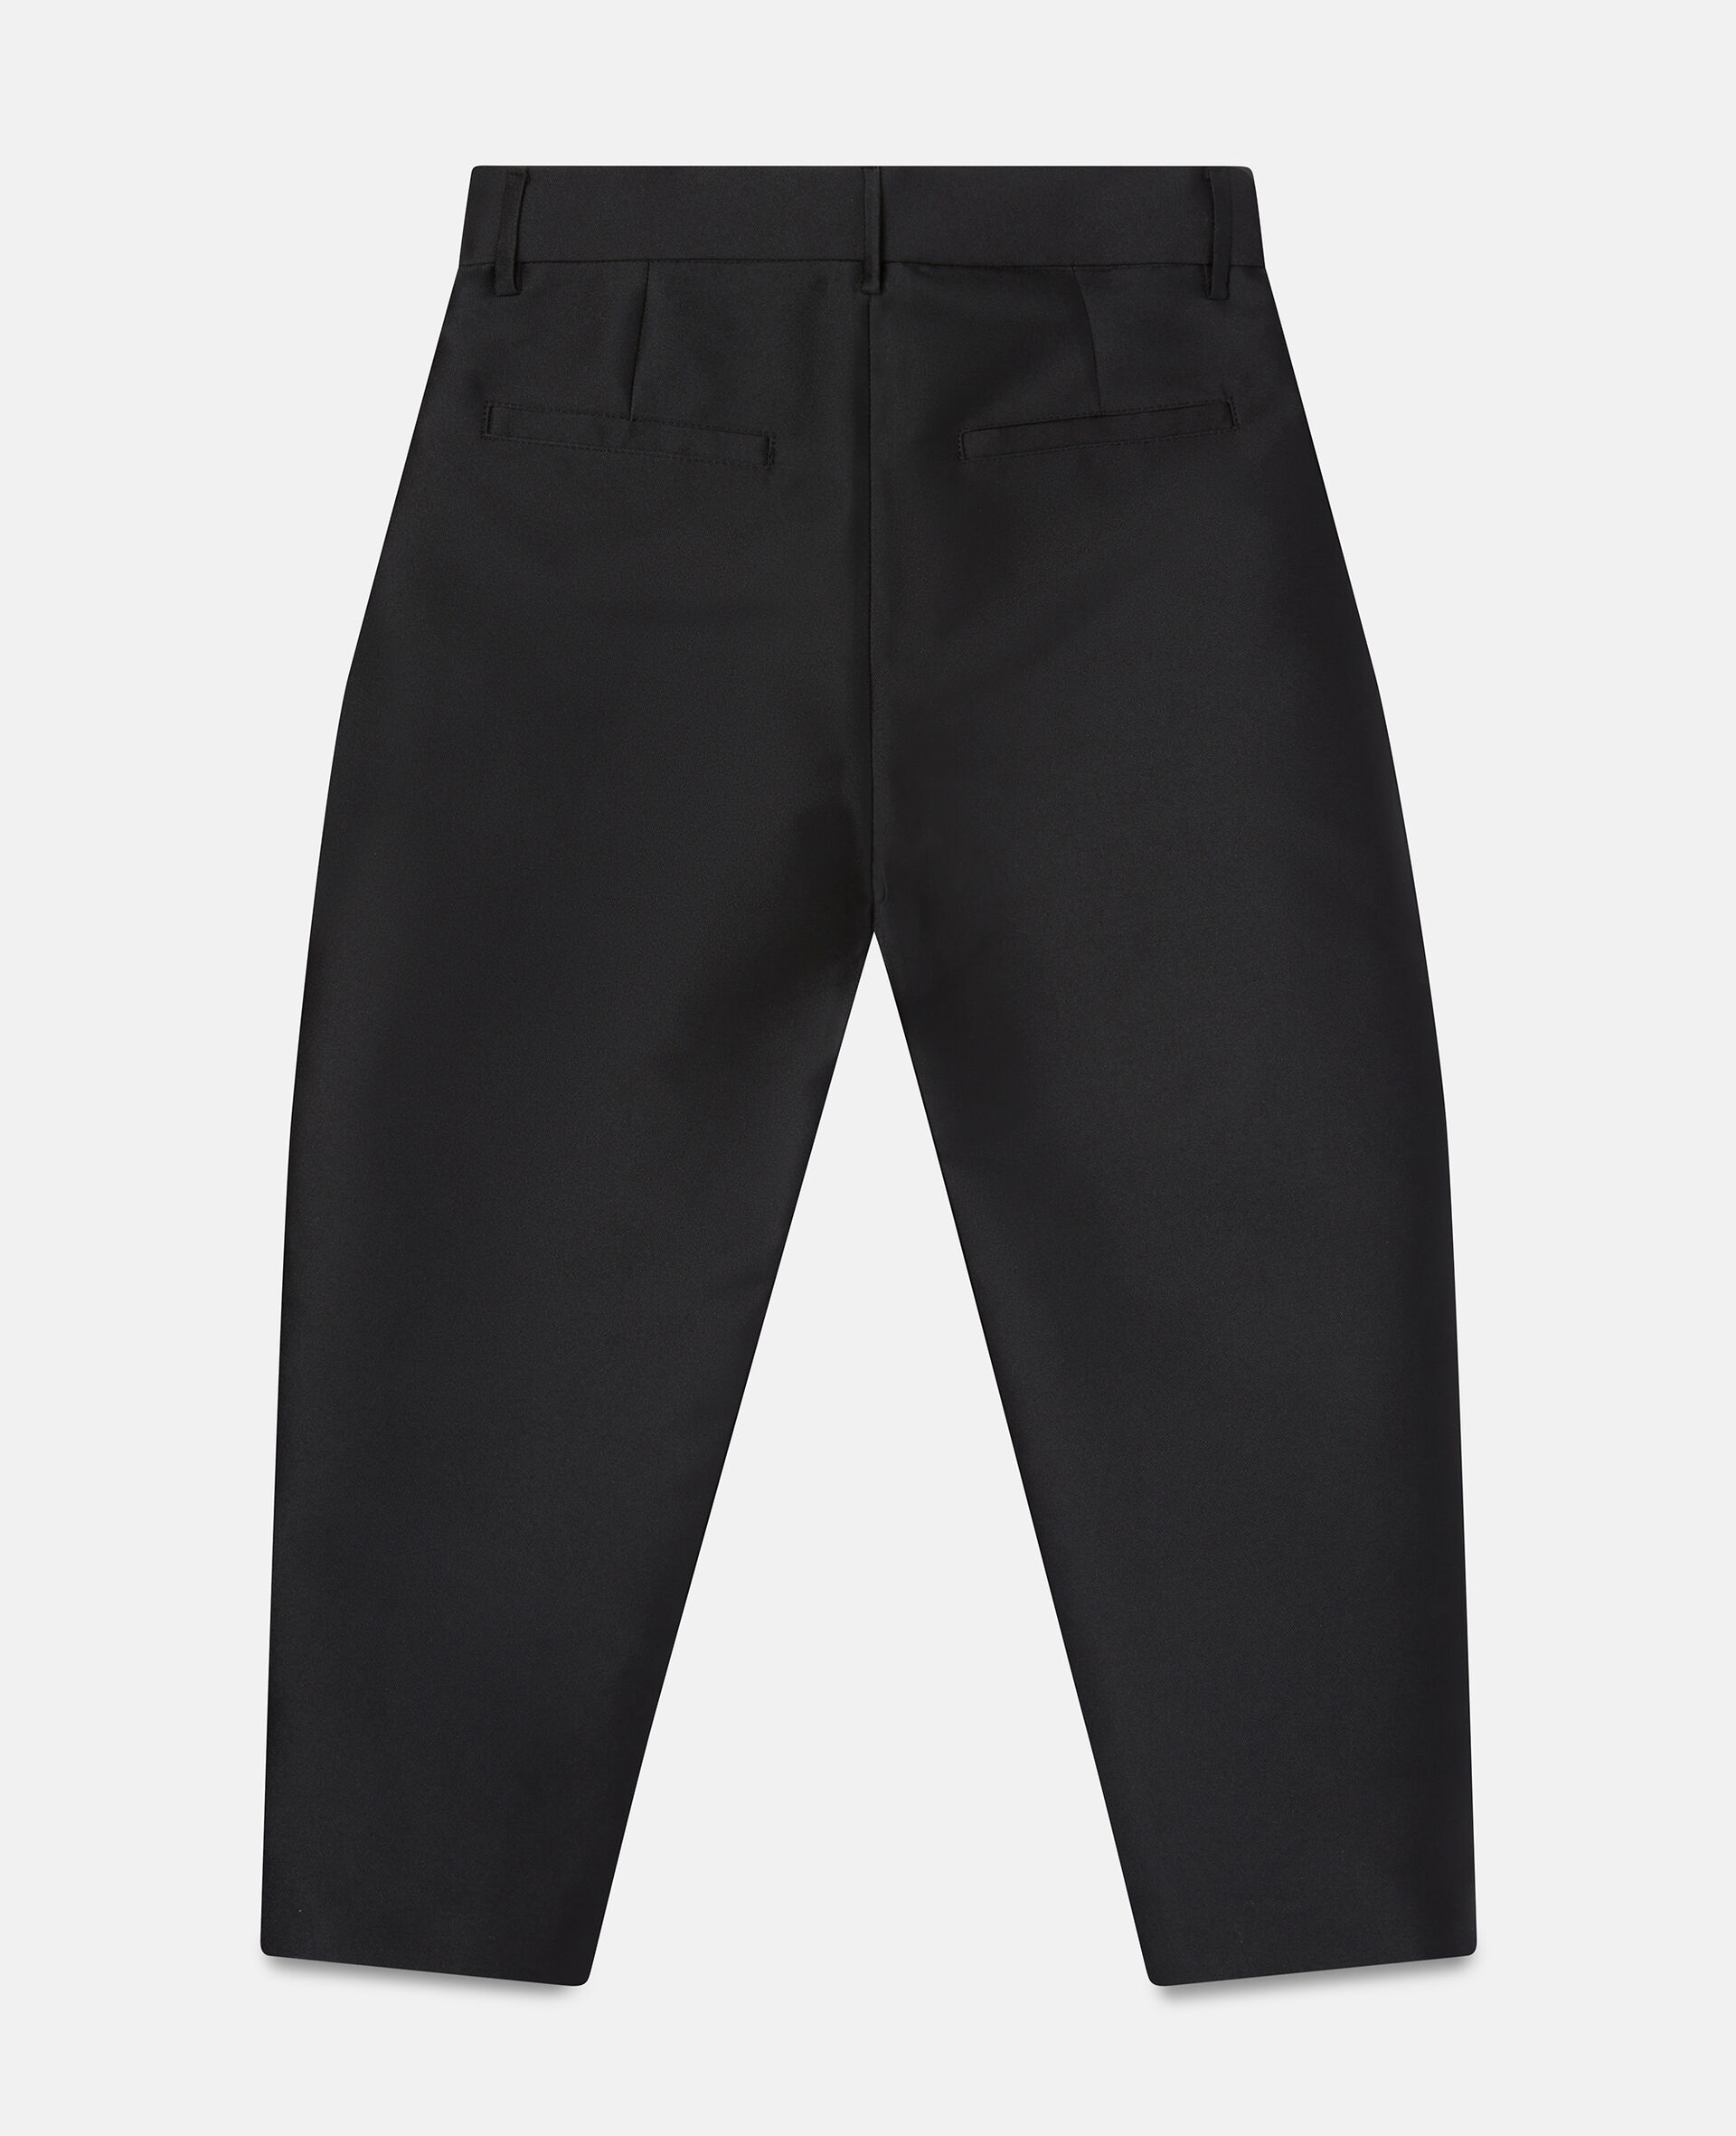 Suit Trousers-Black-large image number 1